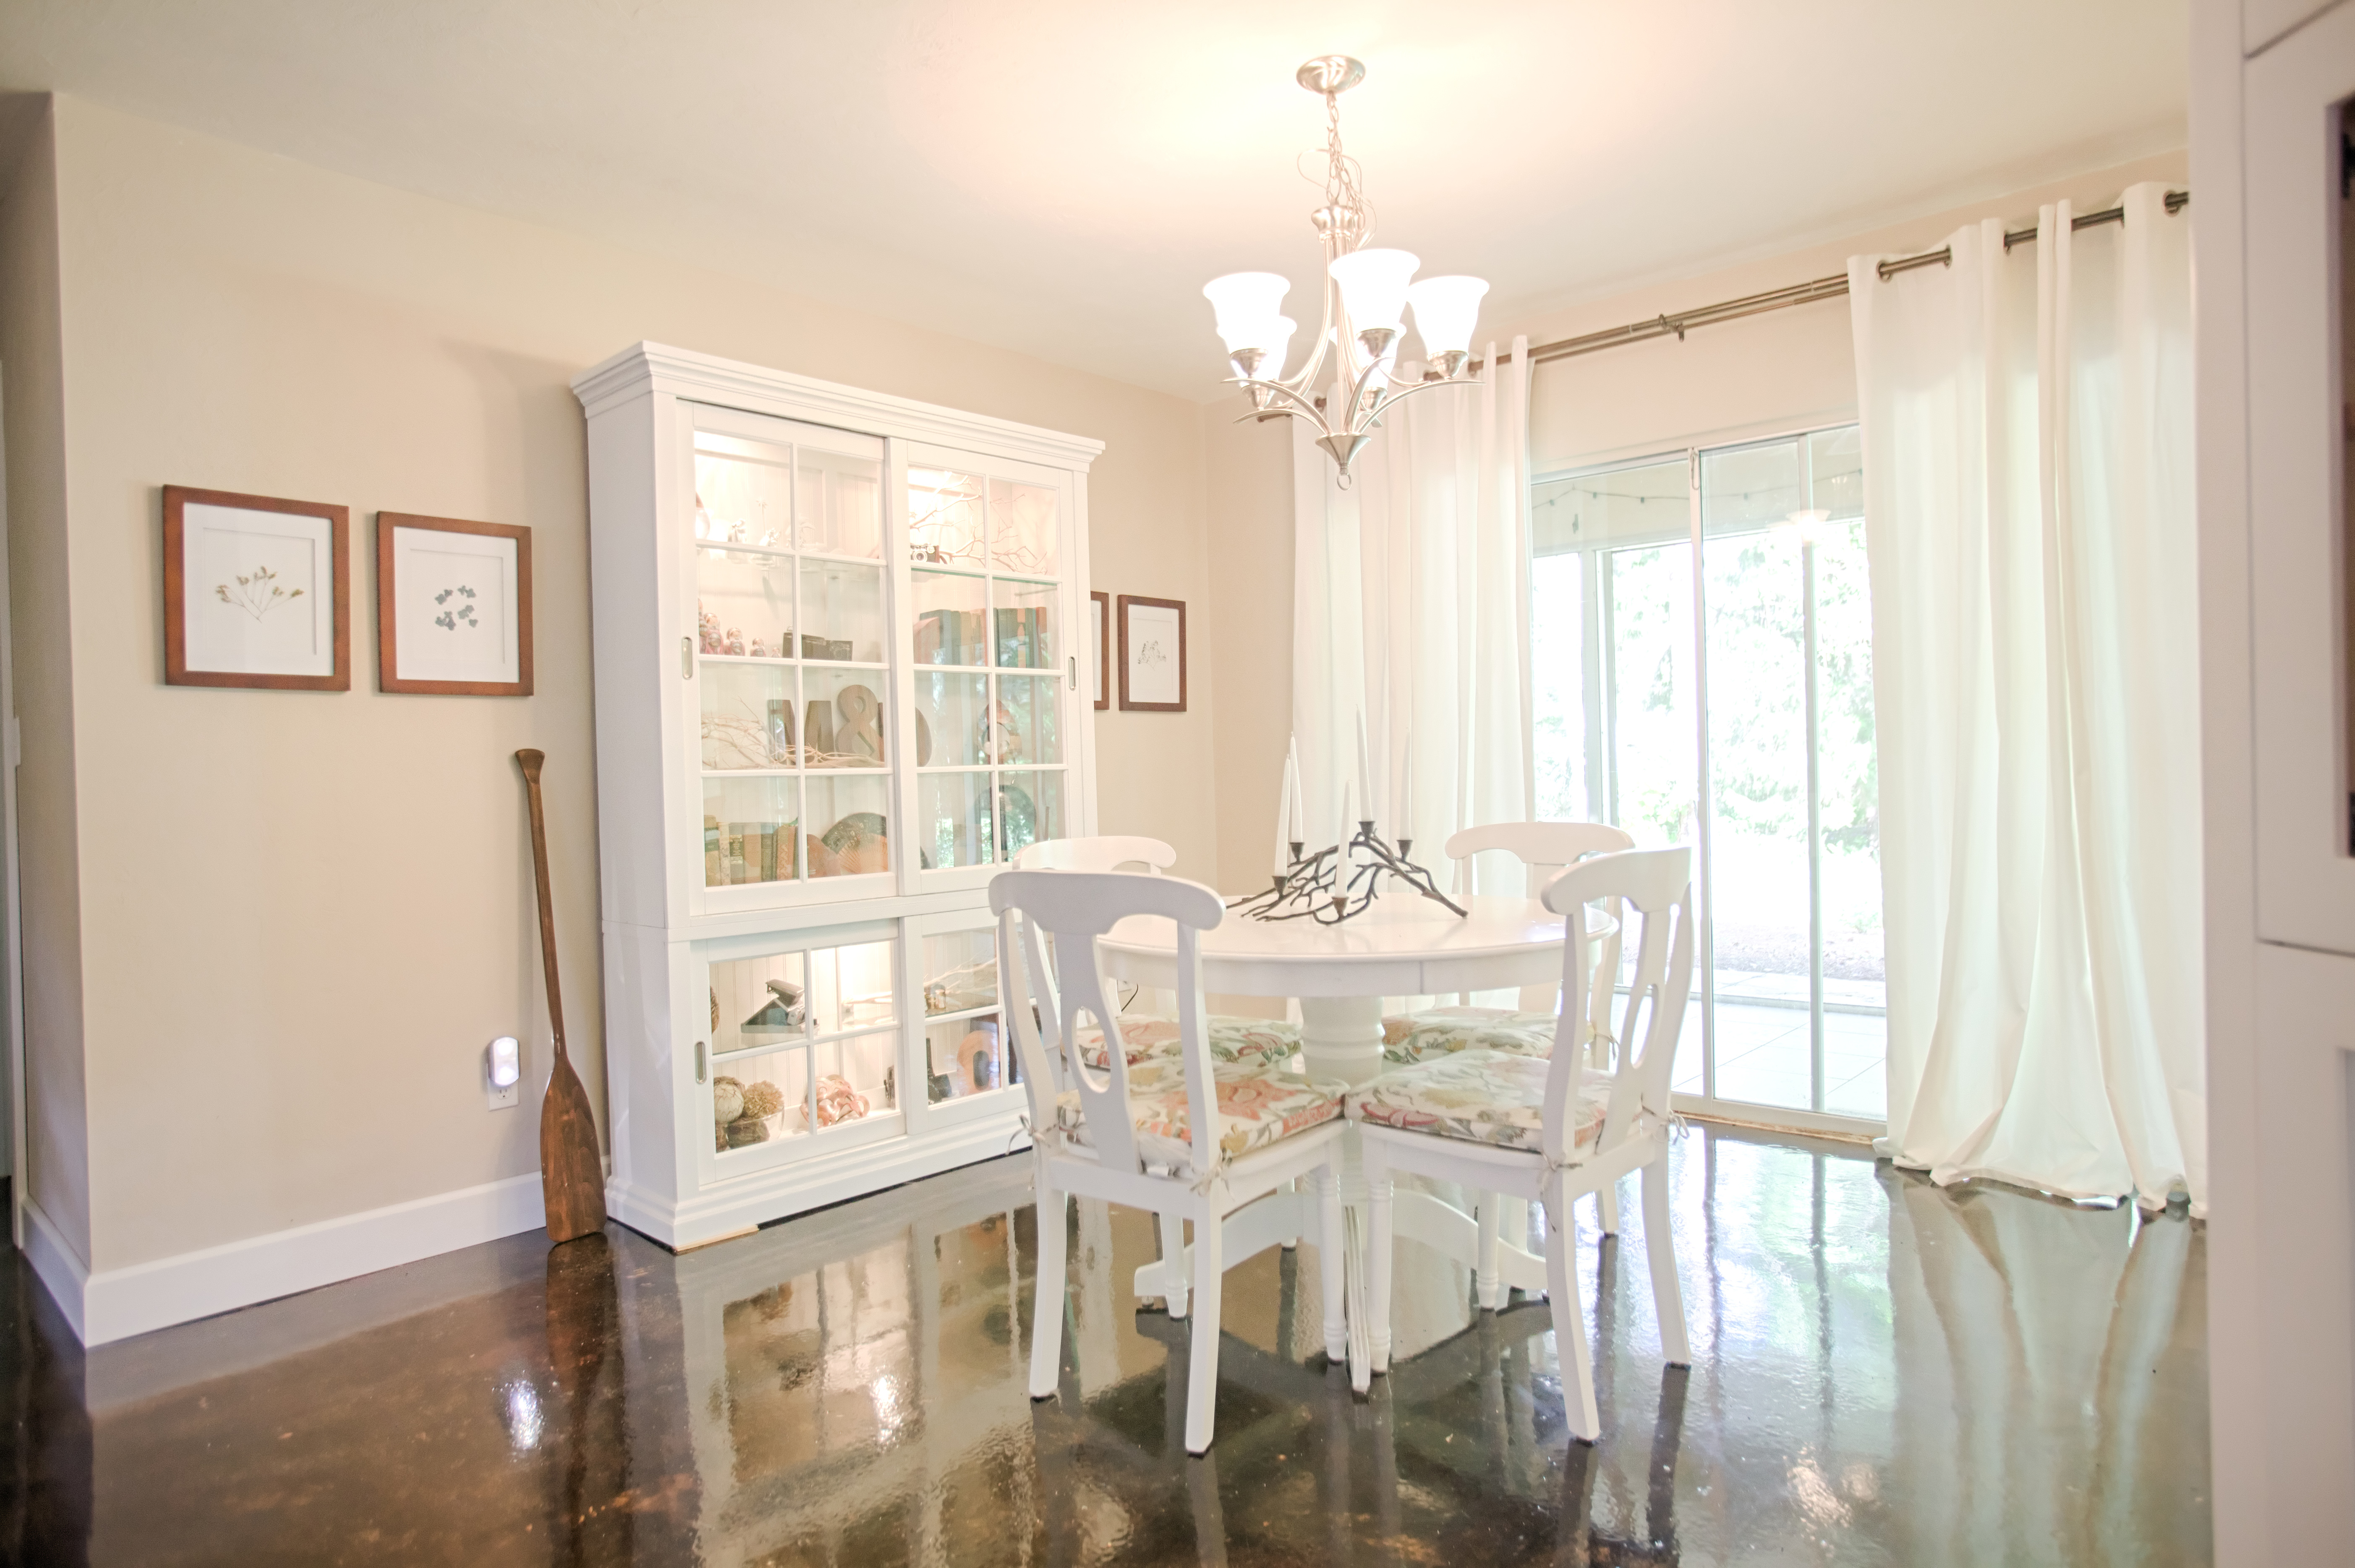 The dining room, painted Benjamin Moore's Cedar Key, is decorated with secondhand furniture